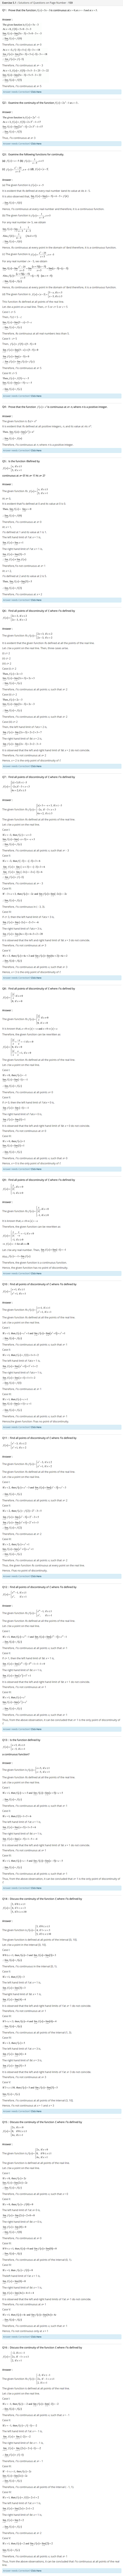 NCERT-Solutions-for-Class-12-Maths-Chapter-5-Continuity-and-Differentiability-1